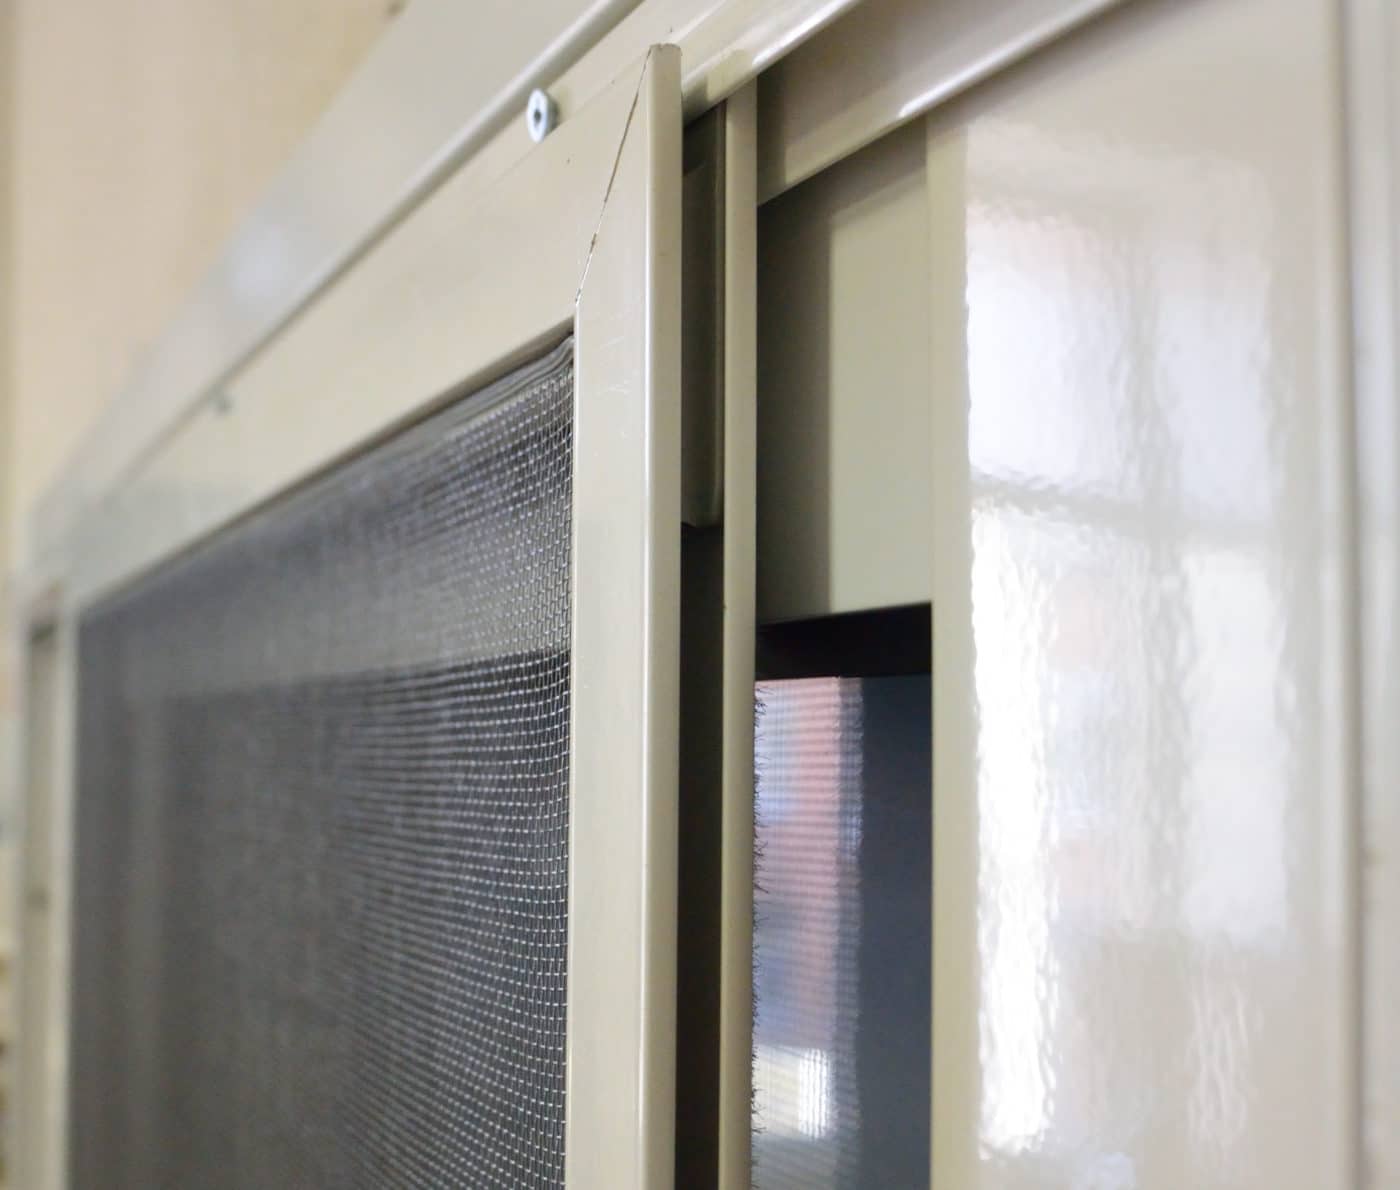 A close up of a door with an energy-efficient screen.